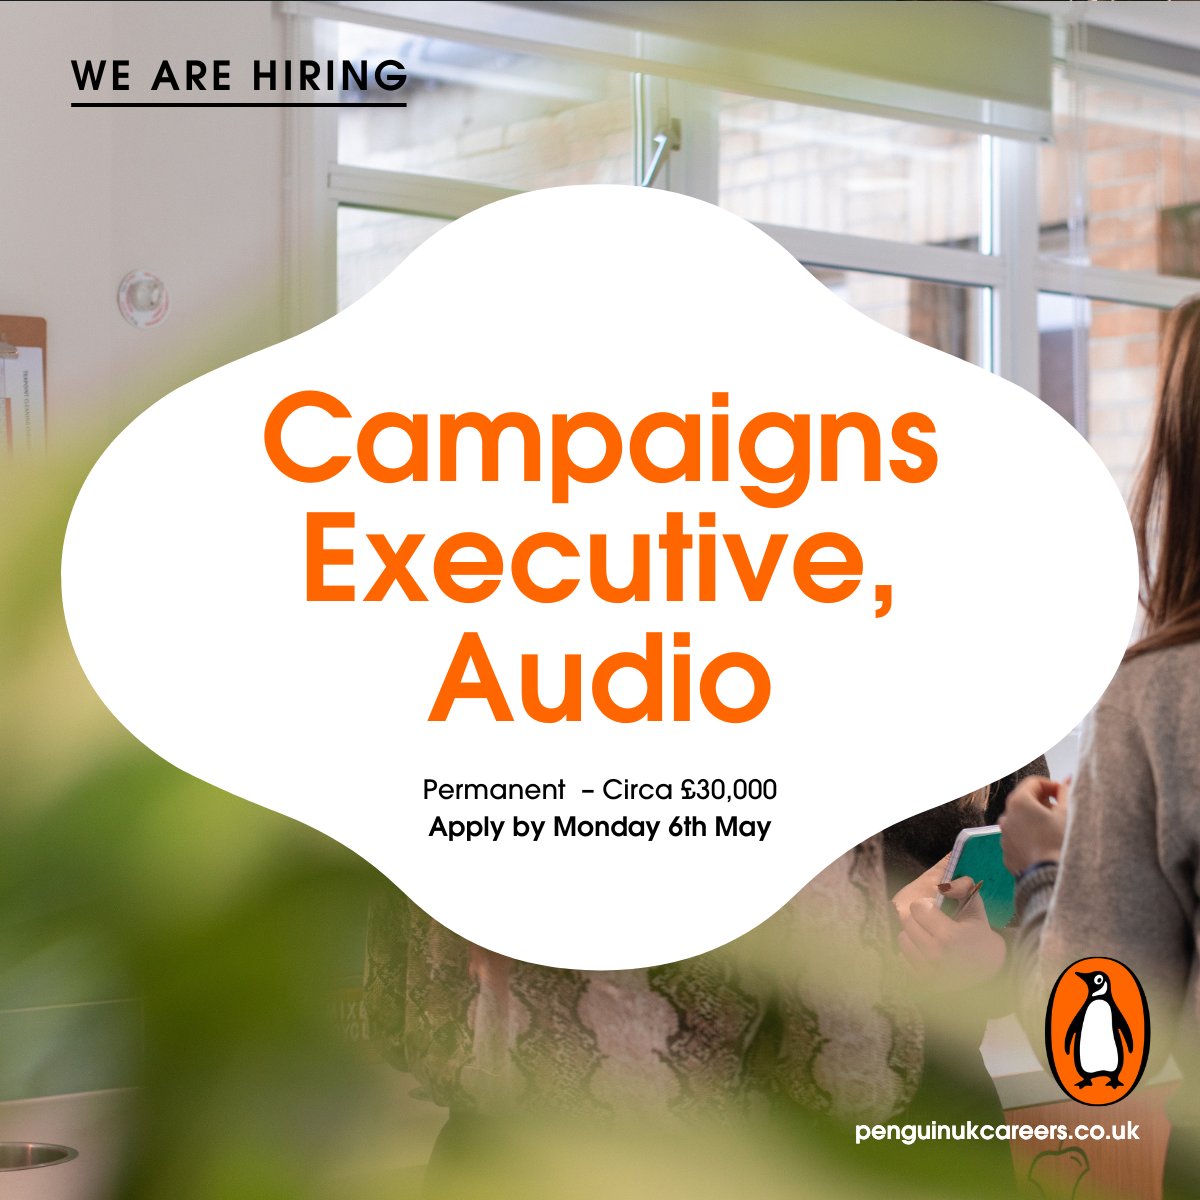 Do you have a passion for audio? Our award-winning team is looking for a Campaigns Executive who is eager to join! Info:shorturl.at/gtzJ3